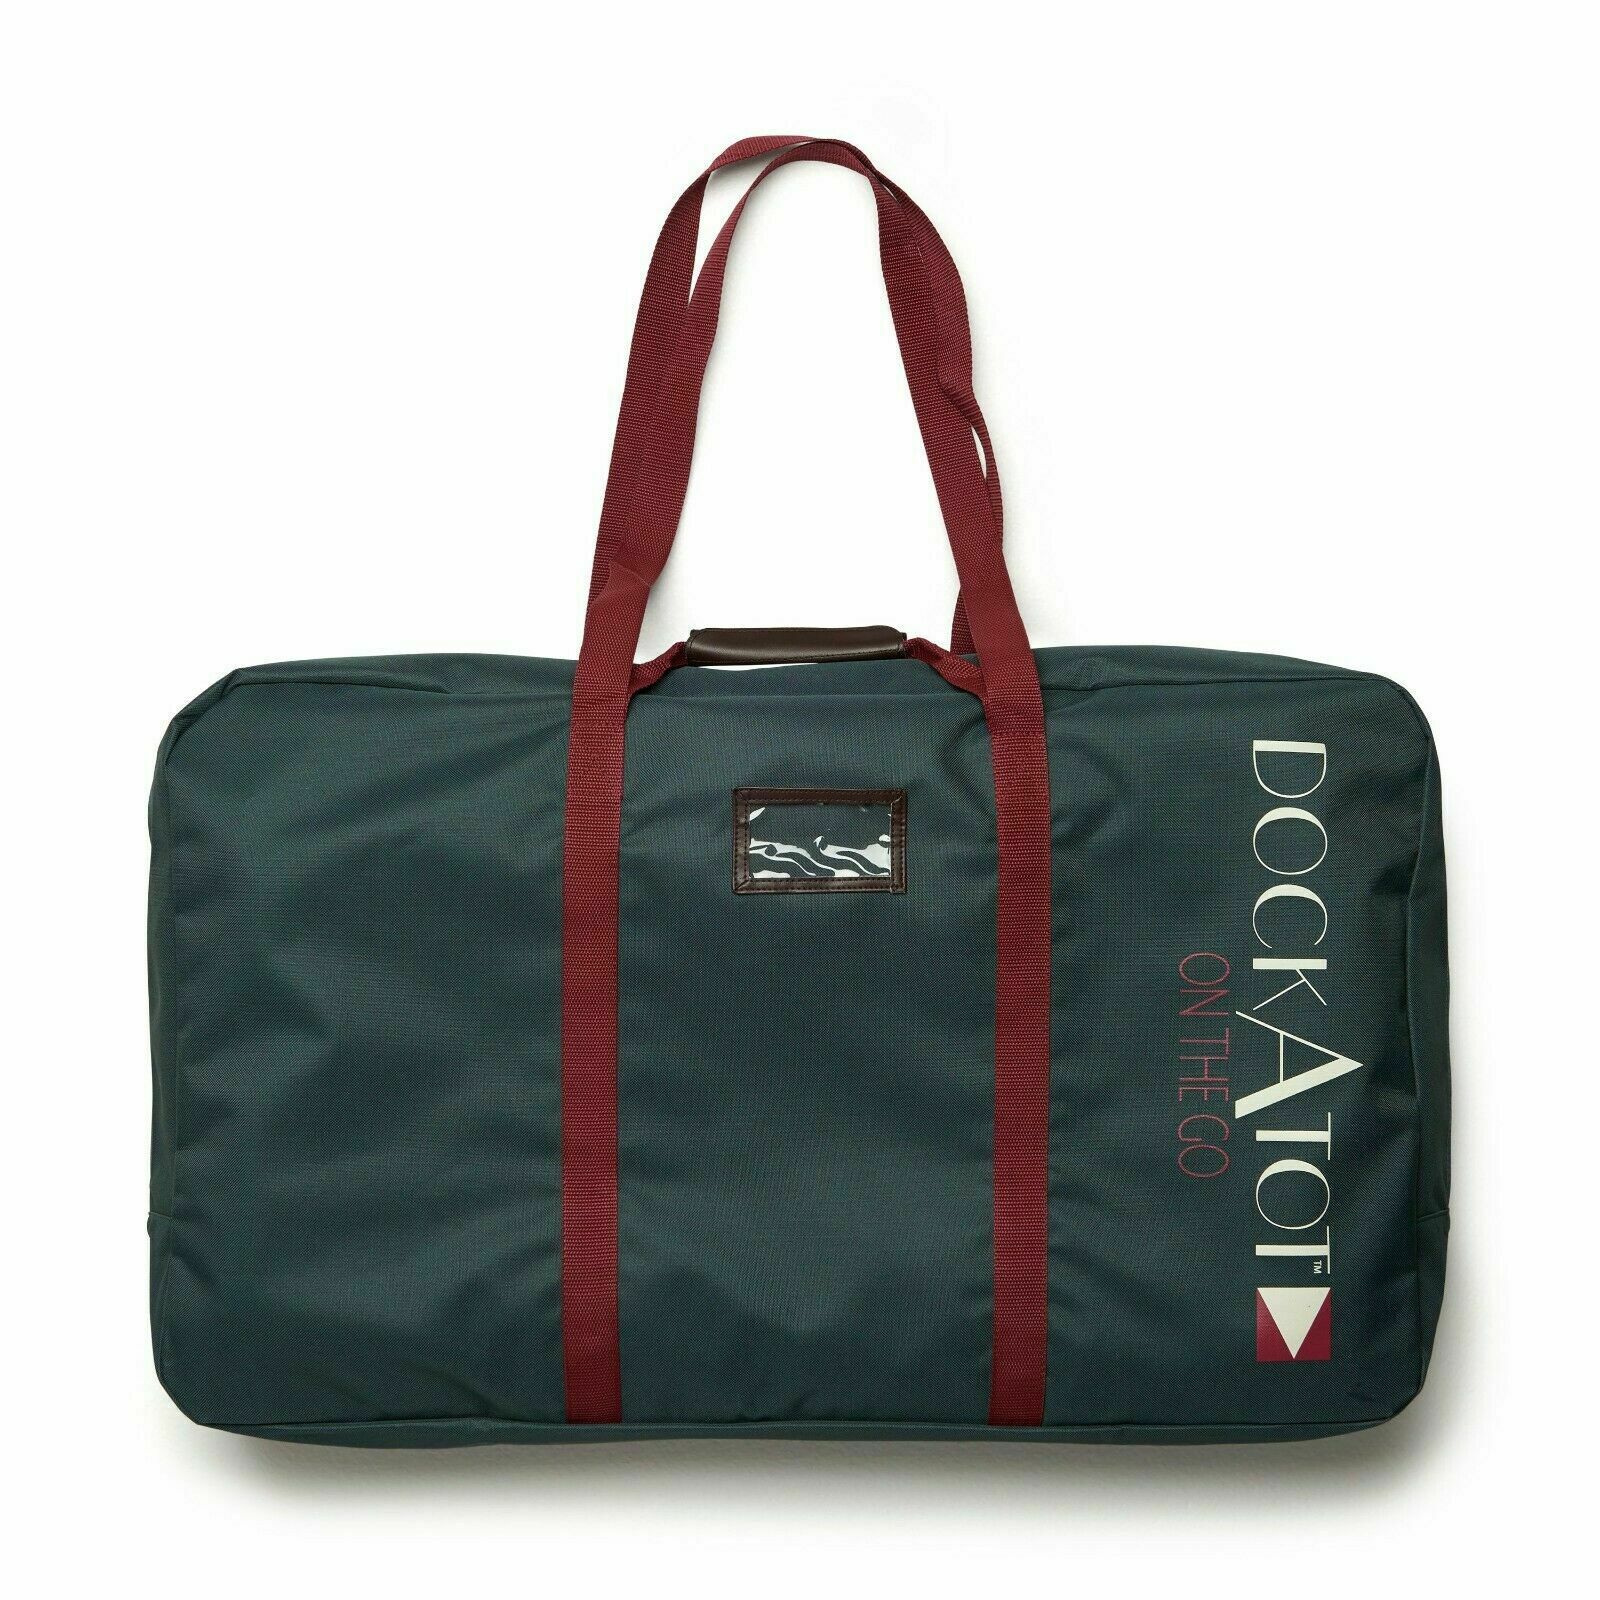 Dockatot On The Go Grand Transport Bag In Midnight Teal Travel Tote